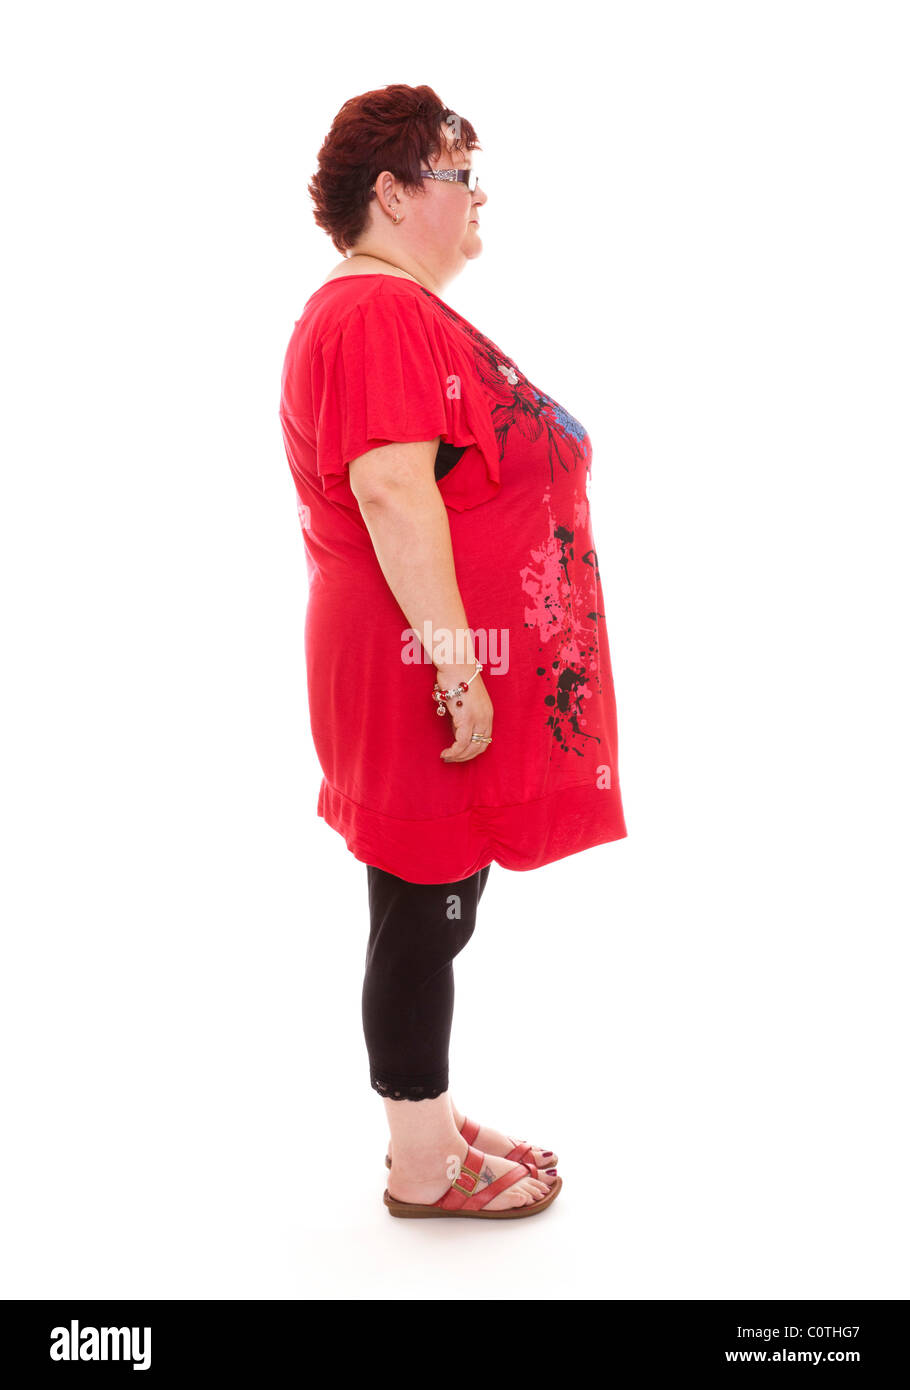 overweight woman standing upright Stock Photo